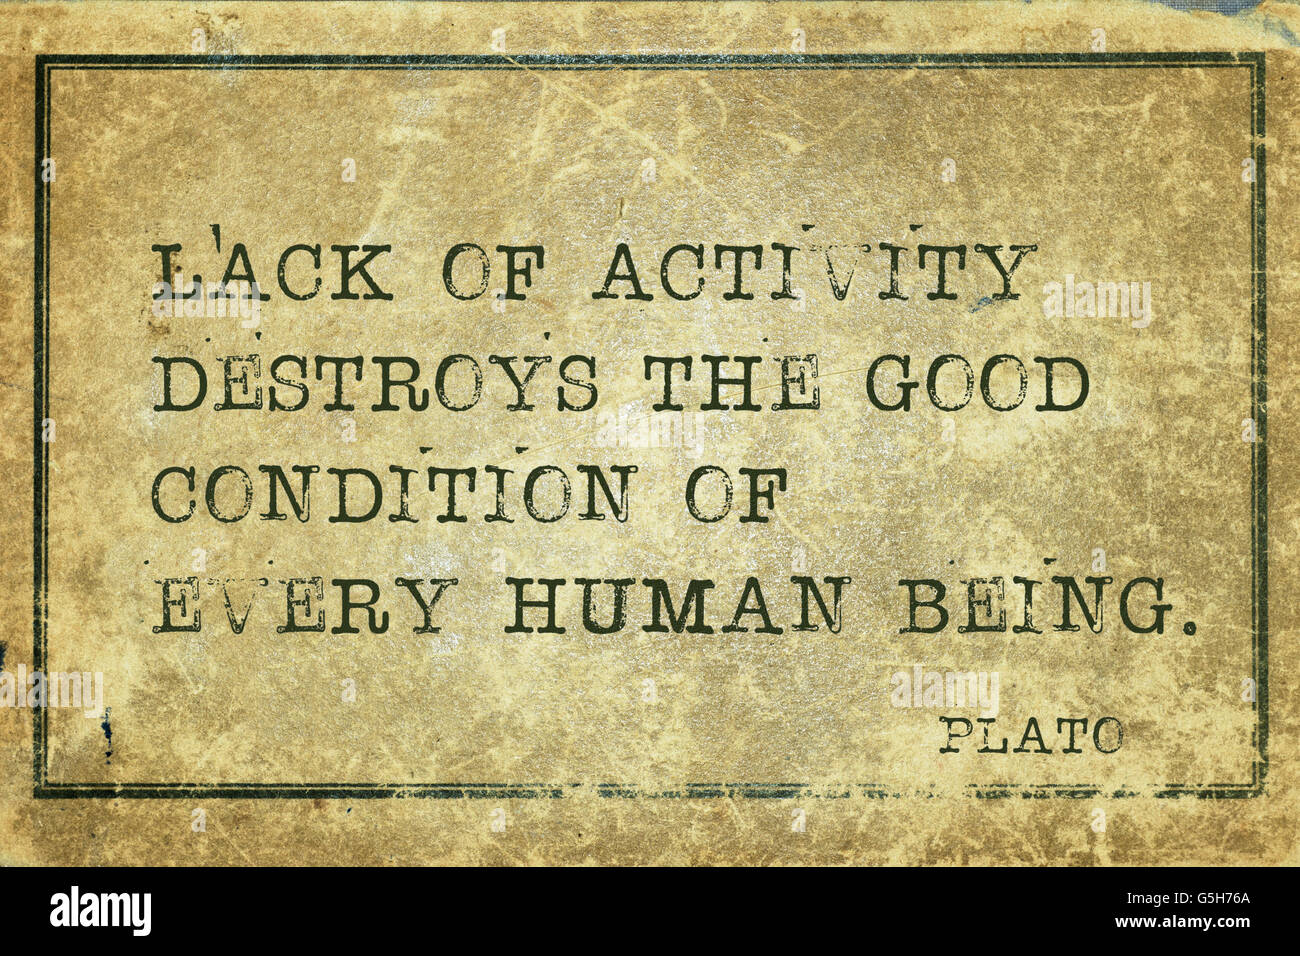 Lack of activity destroys the good - ancient Greek philosopher Plato quote printed on grunge vintage cardboard Stock Photo